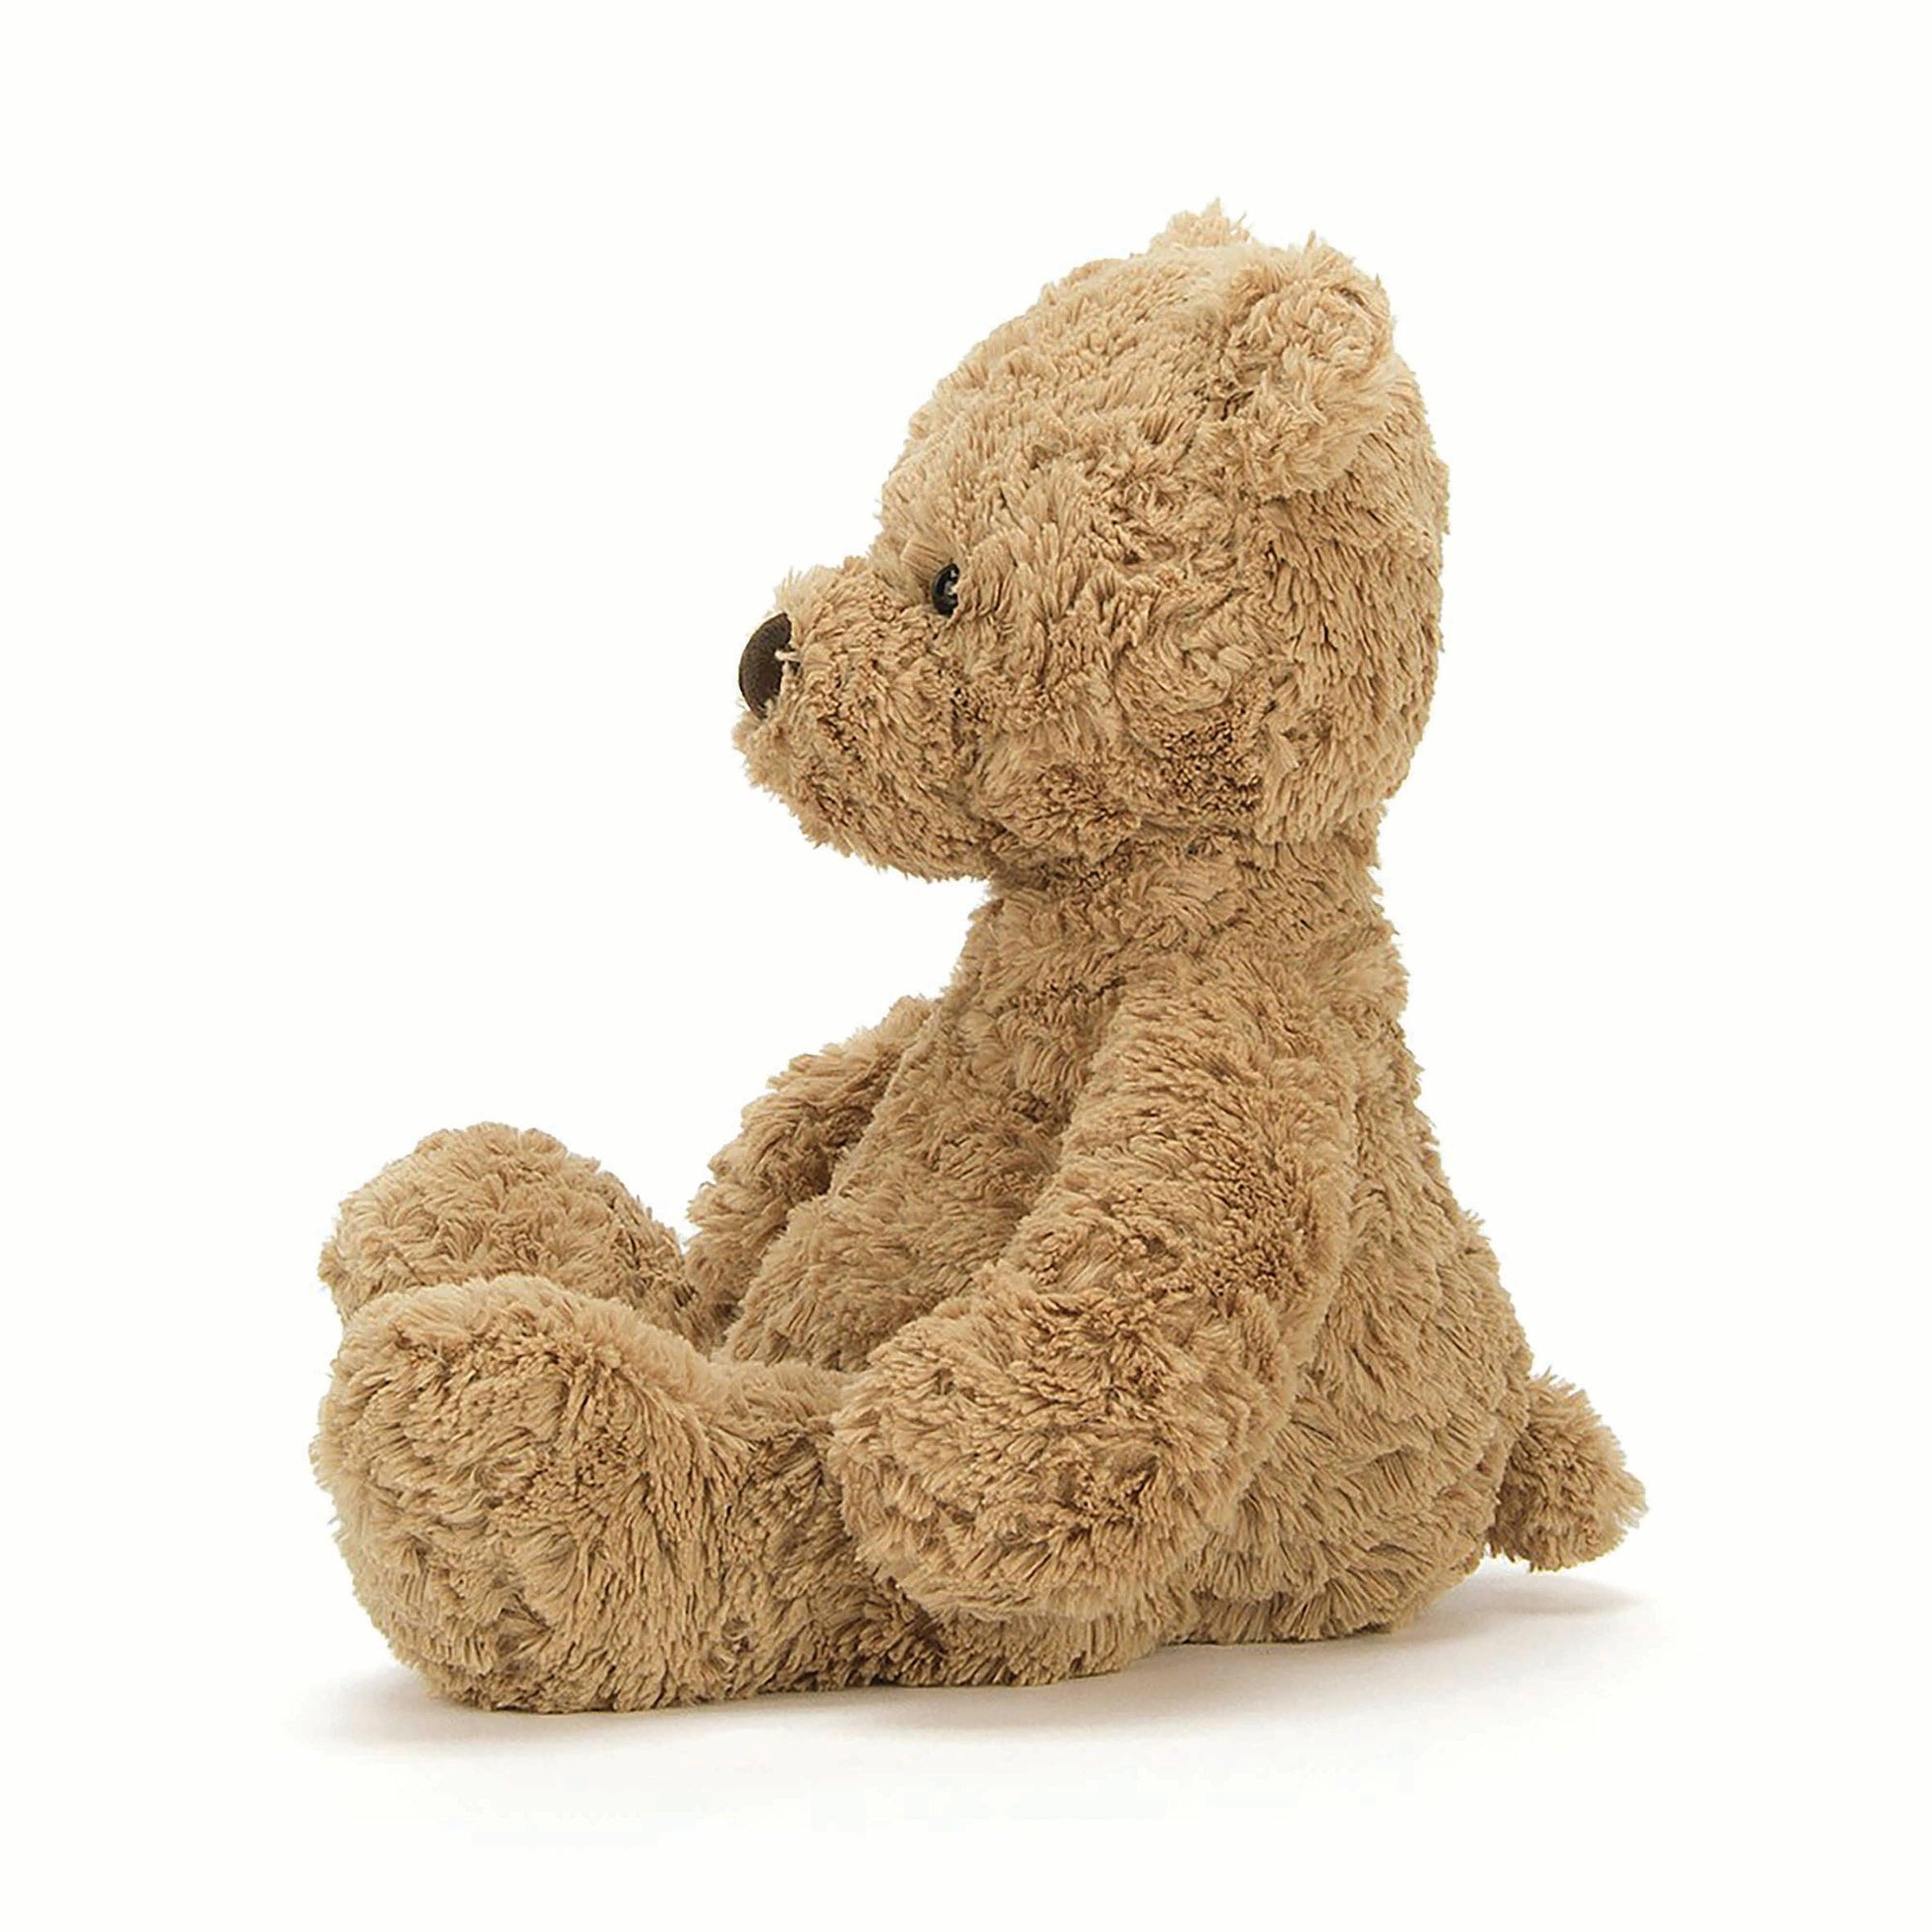 Jellycat Bumbly Bear - 38cm - Soft toy - Independence studios